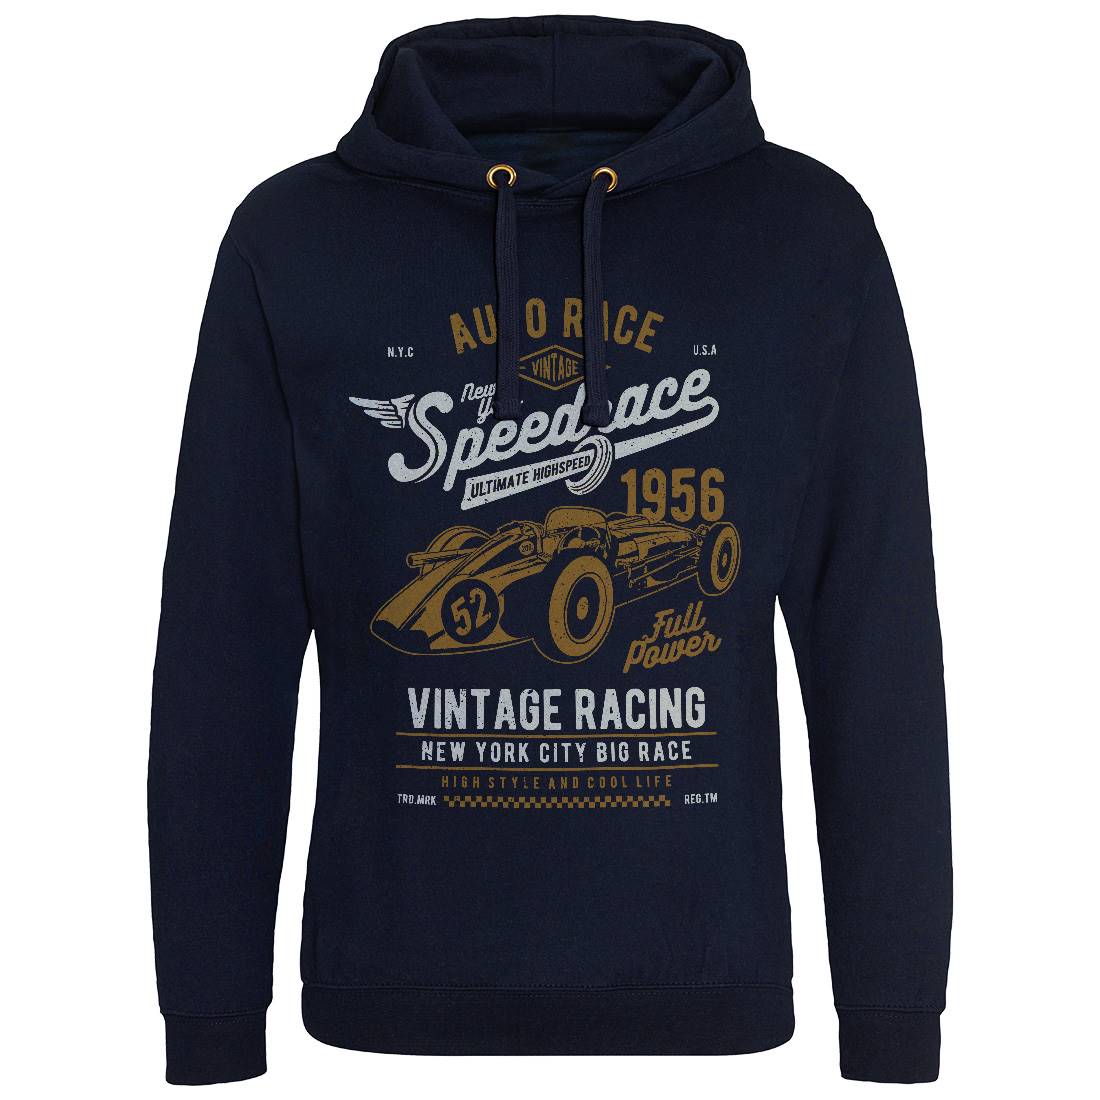 Vintage Speedrace Mens Hoodie Without Pocket Cars A788